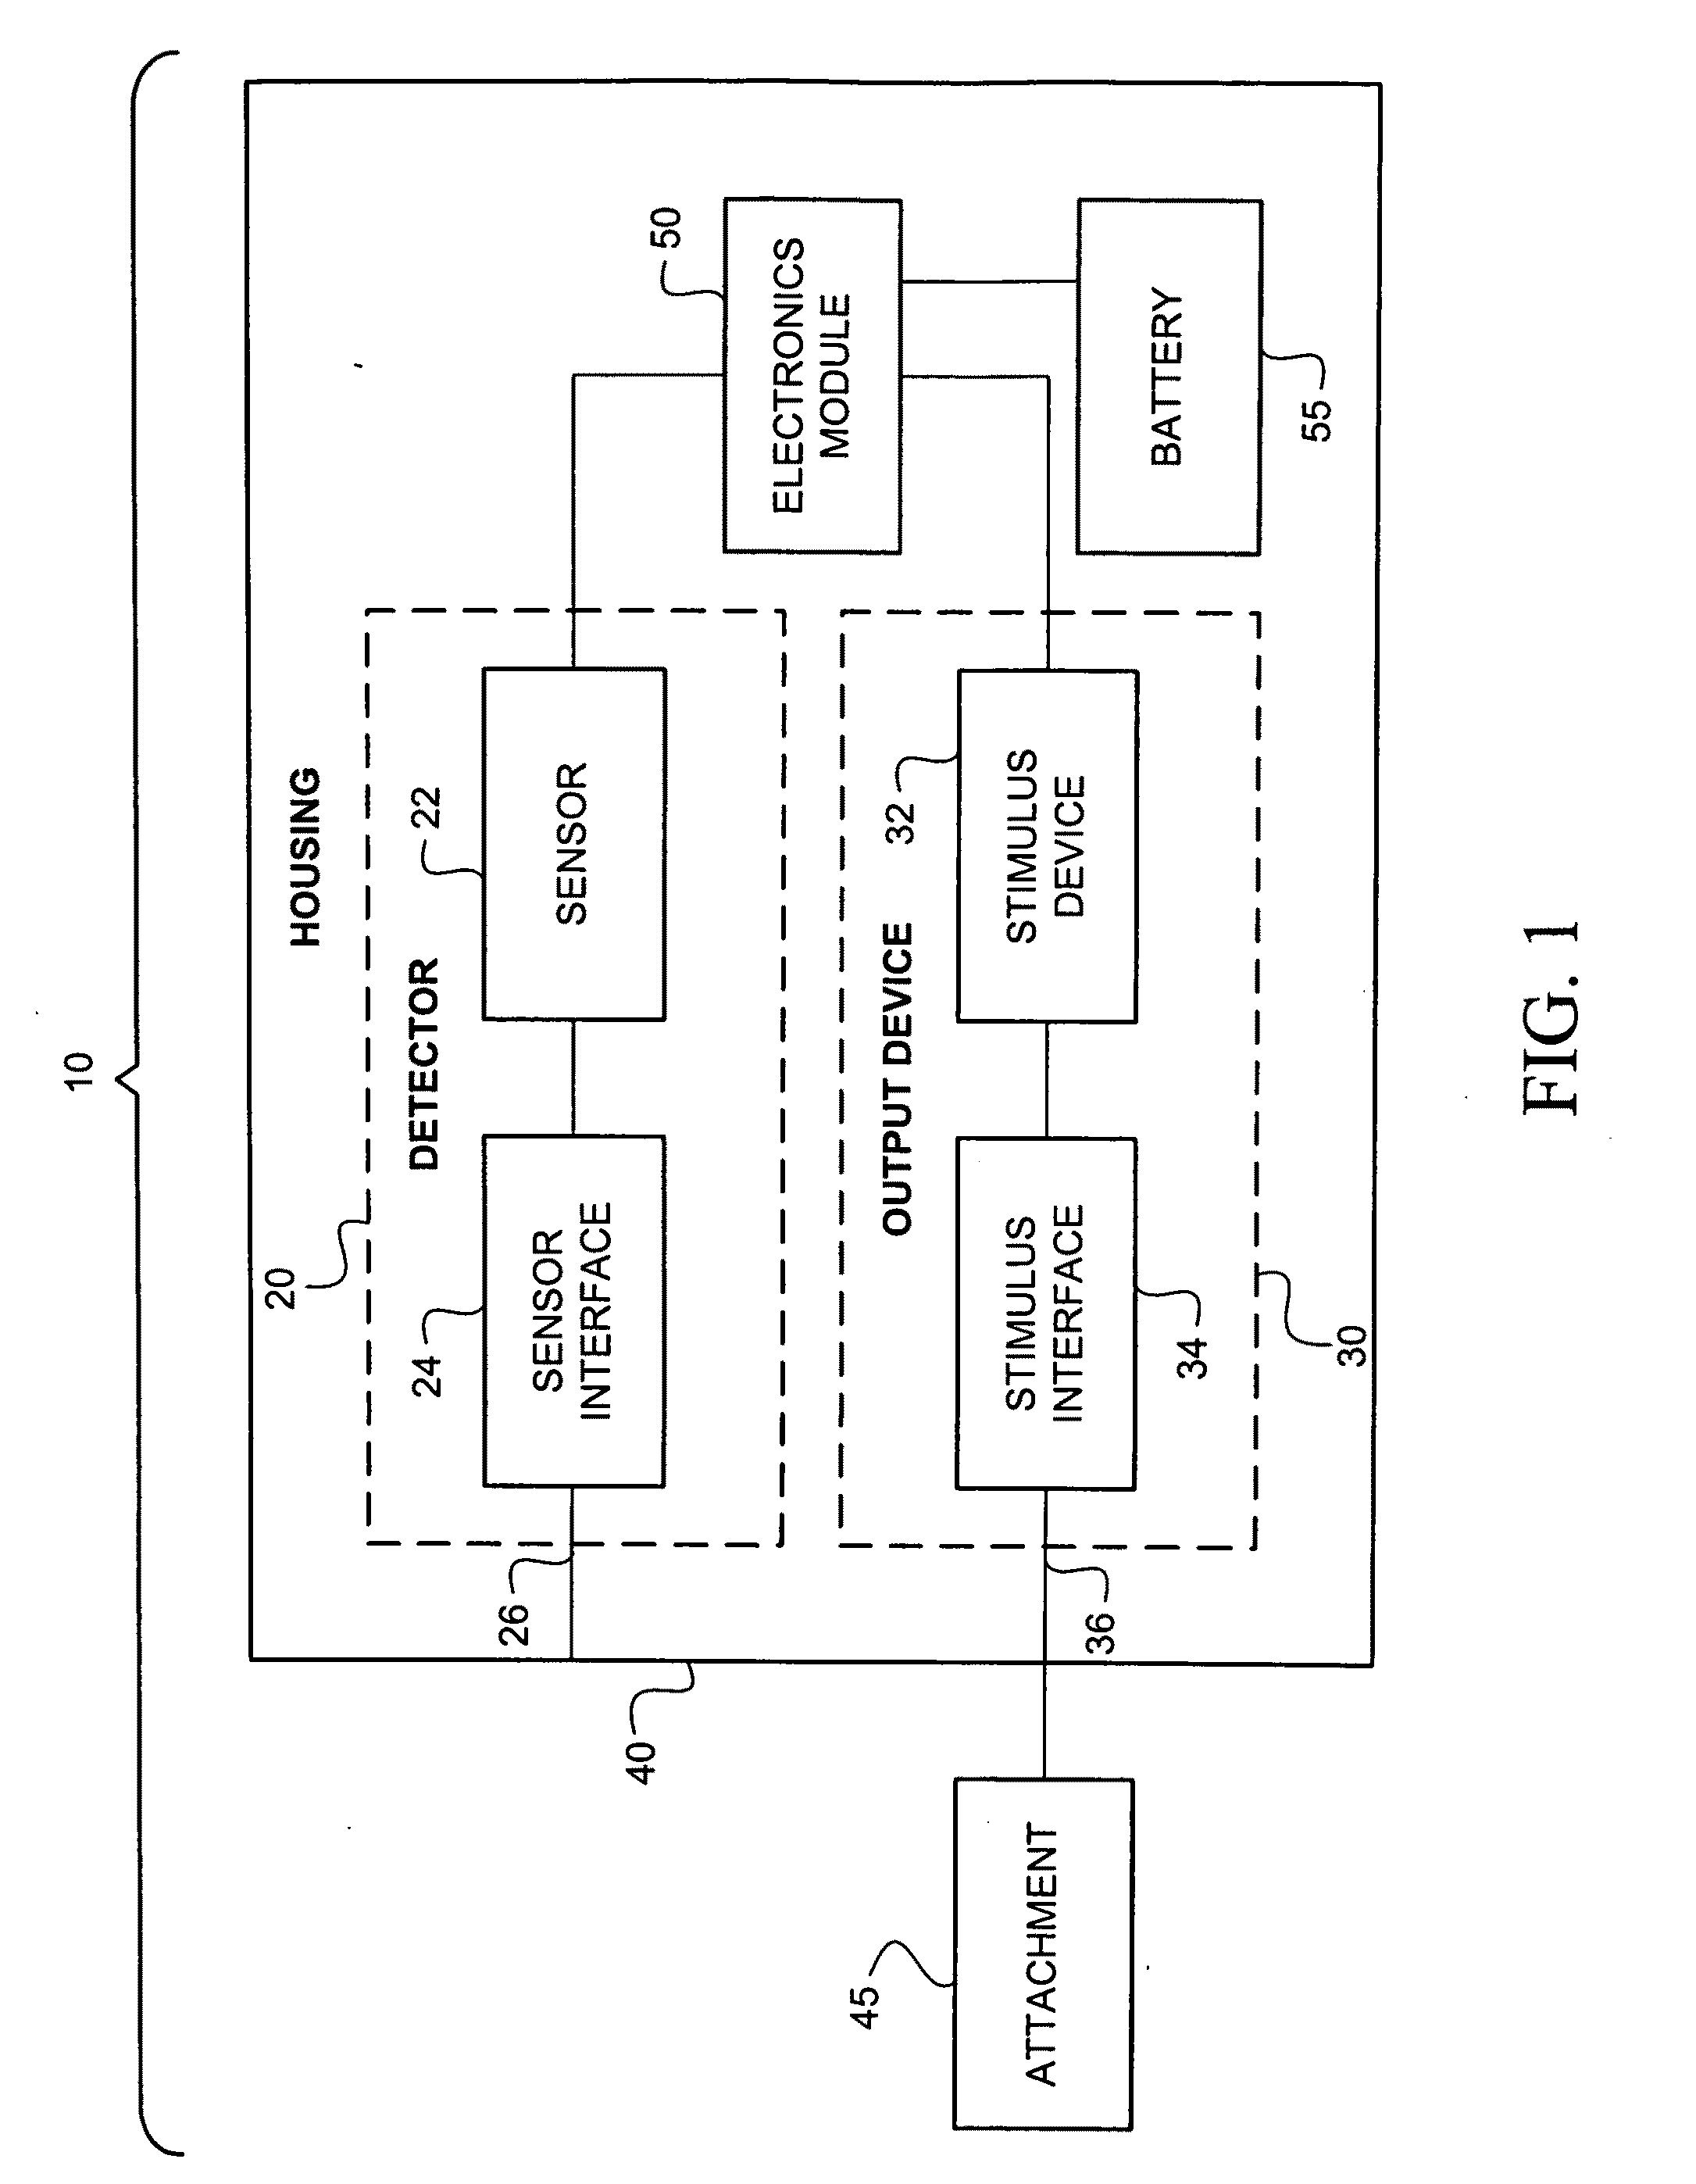 Intraoral behavior monitoring and aversion devices and methods